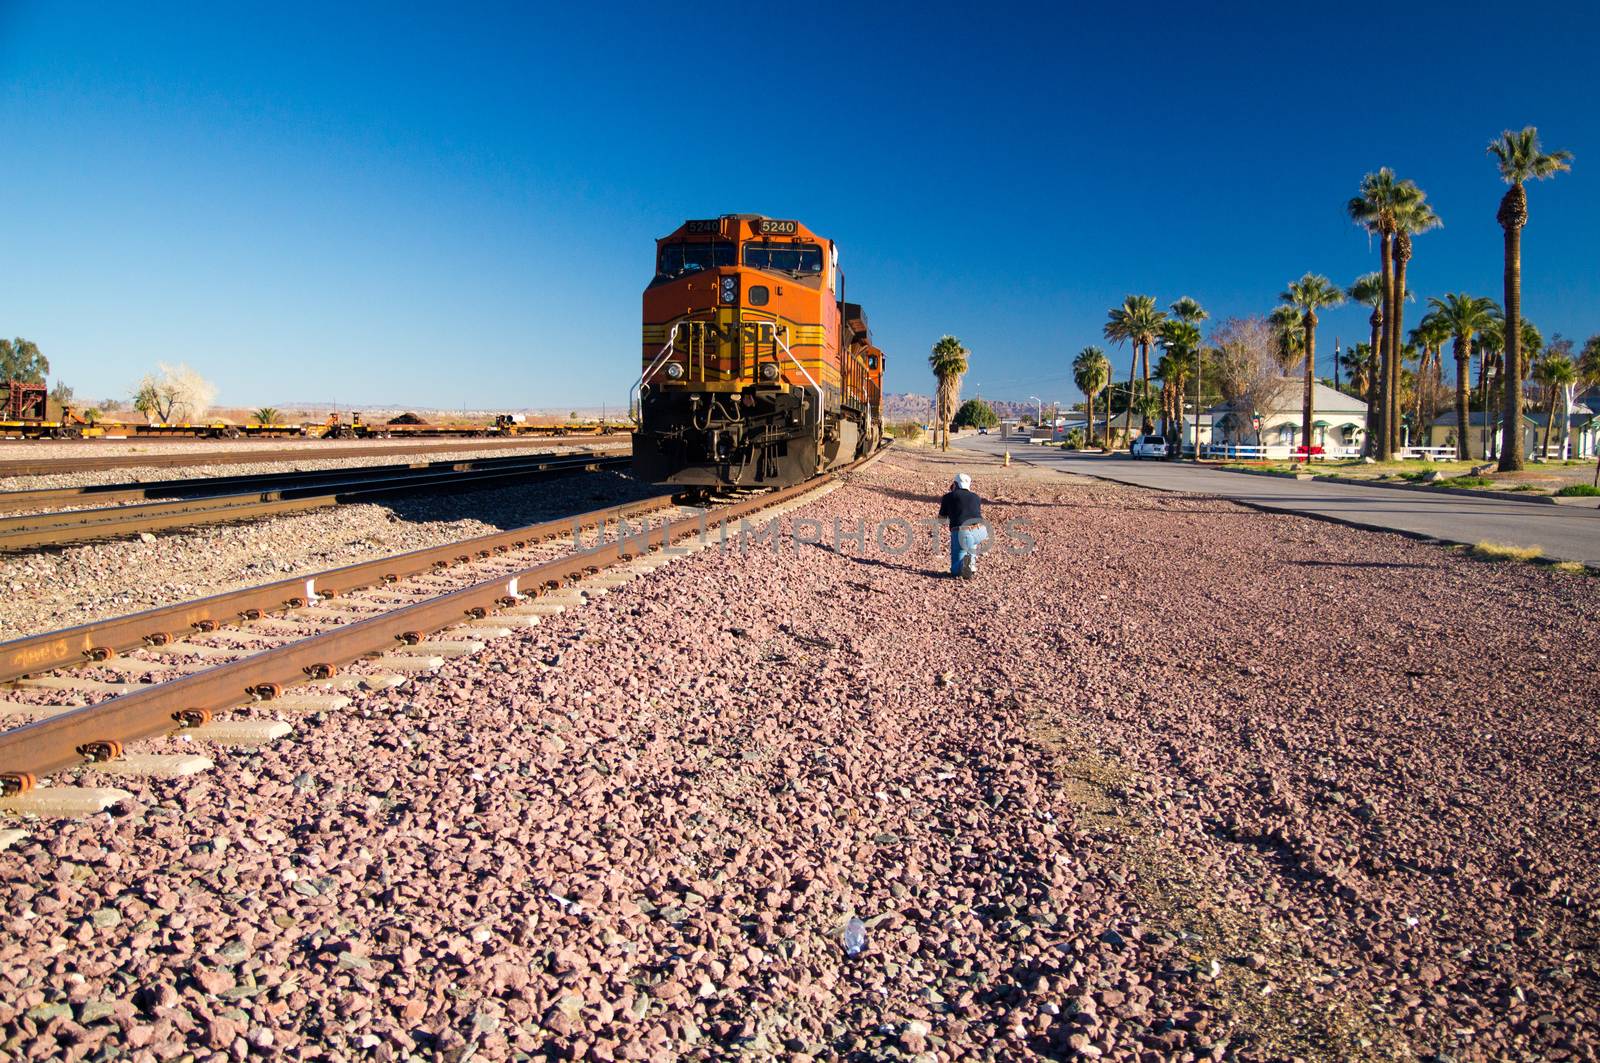 Photographer at BNSF Freight Train Locomotive No. 5240 by emattil